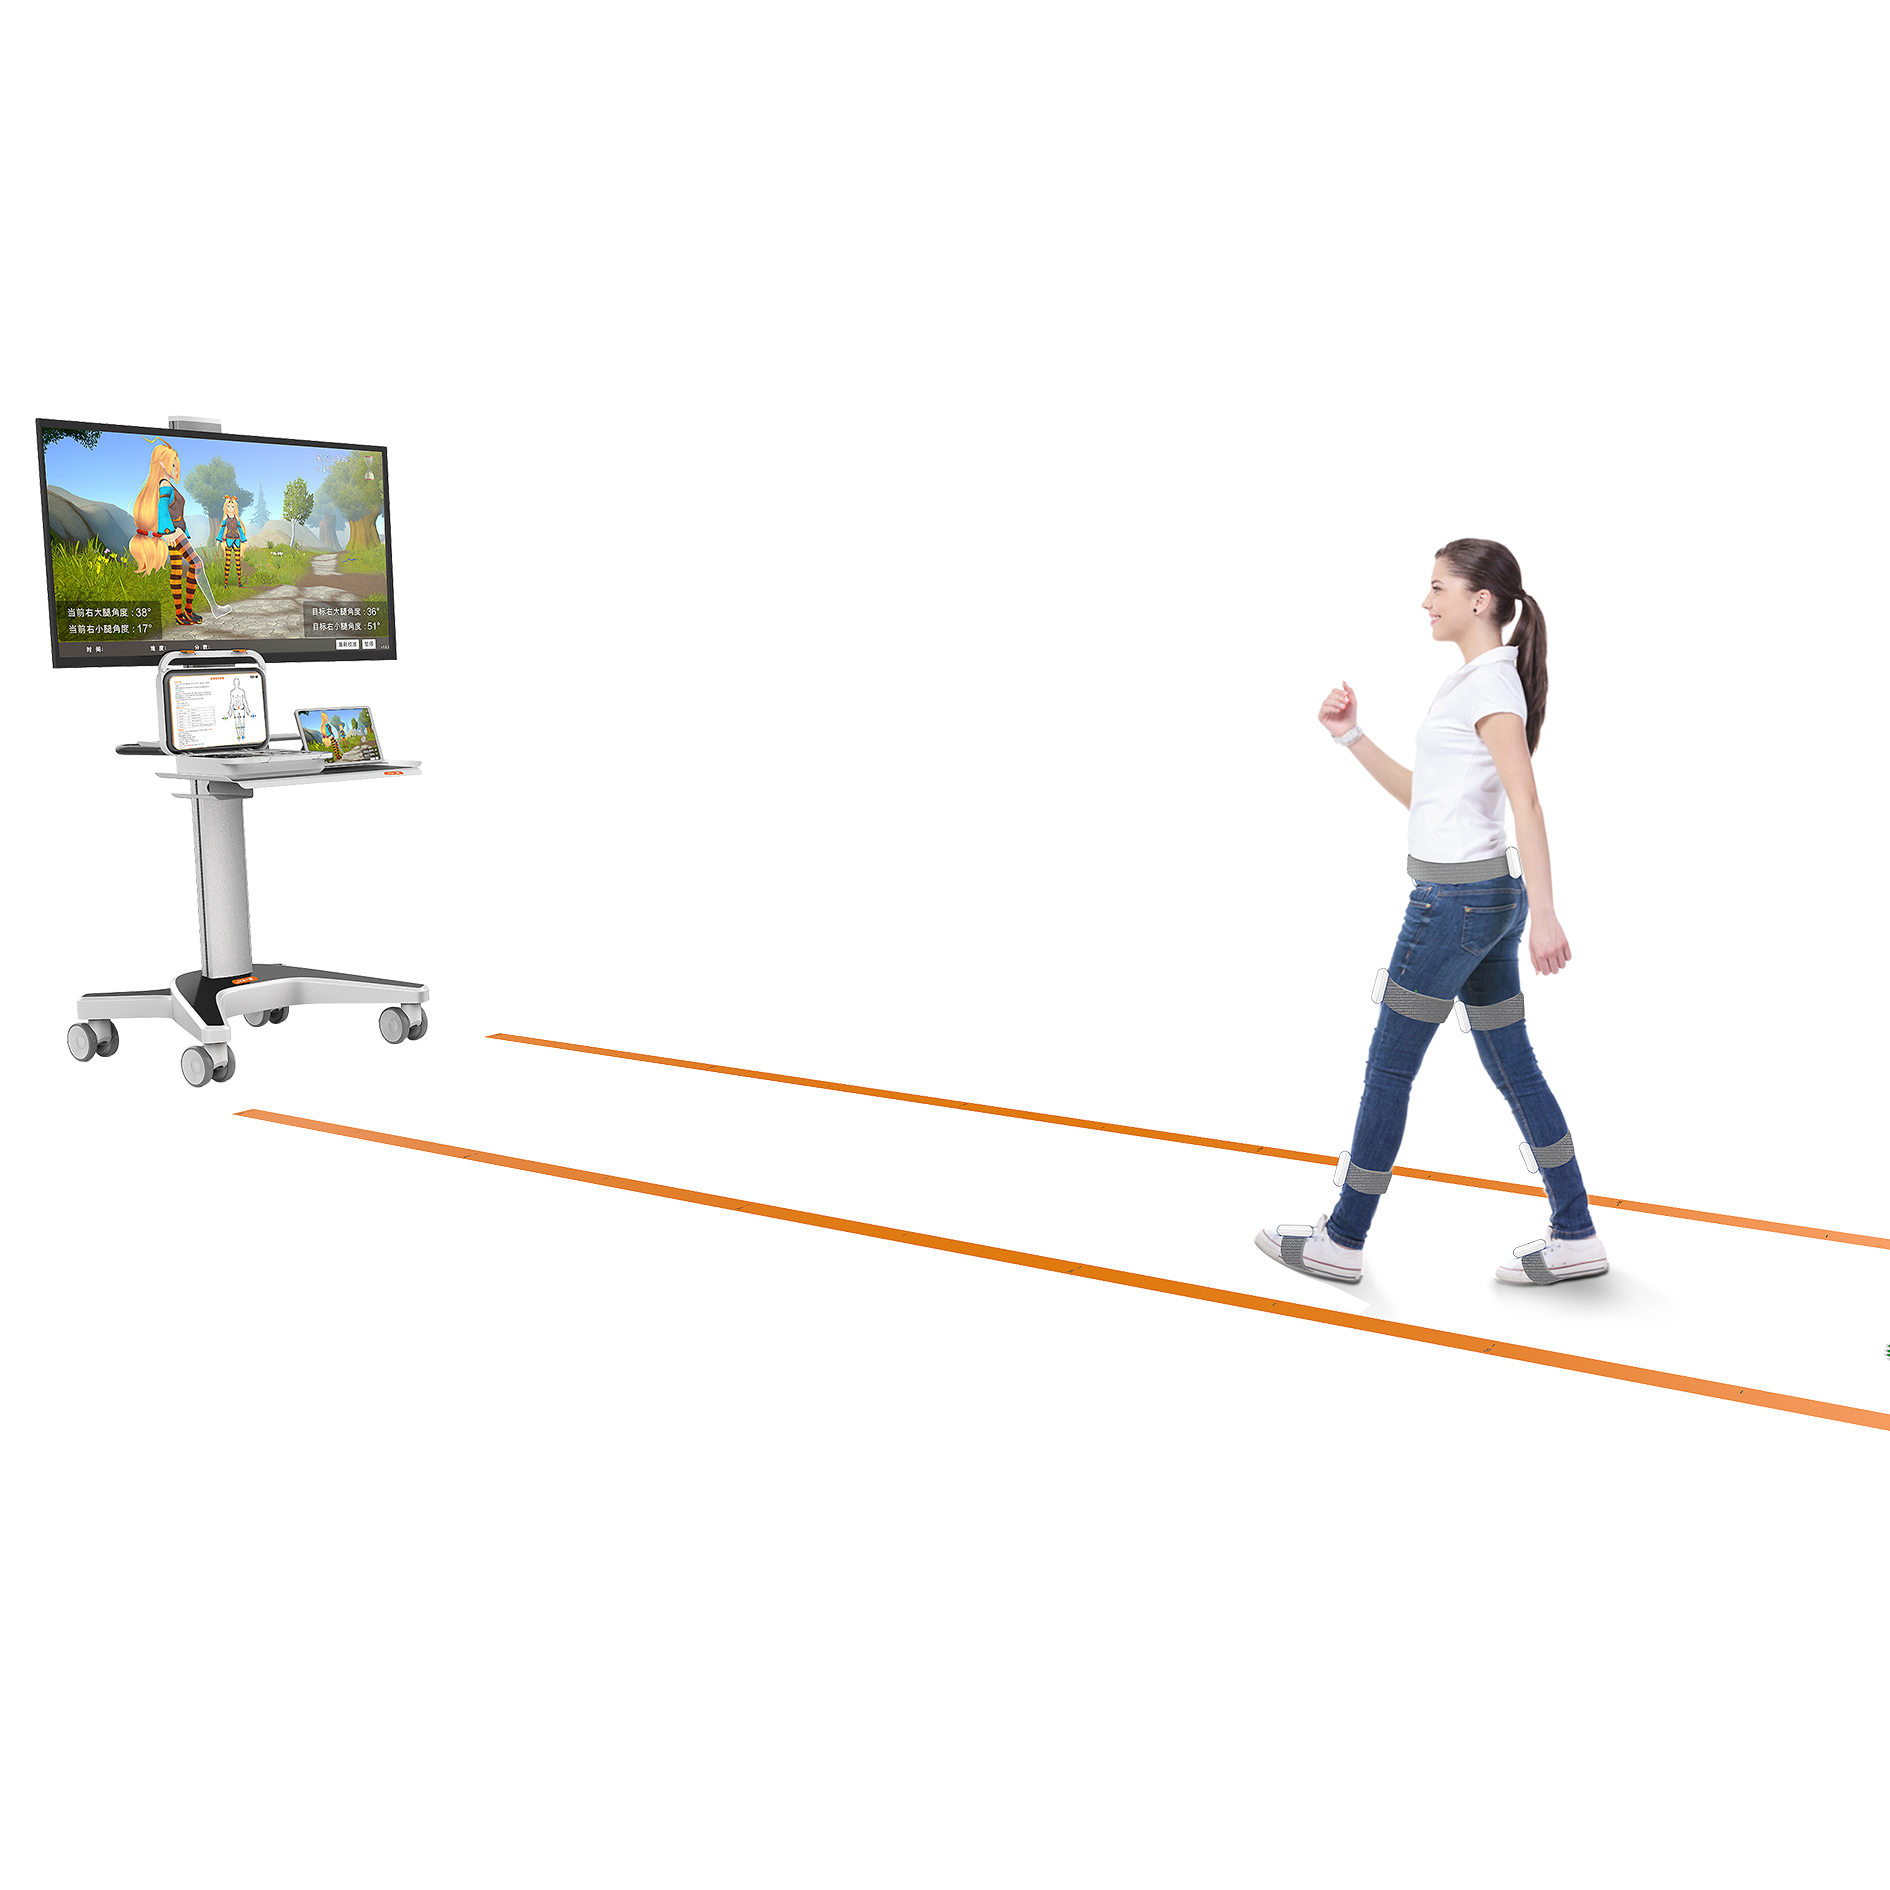 Gait Analysis System A7 Featured Image